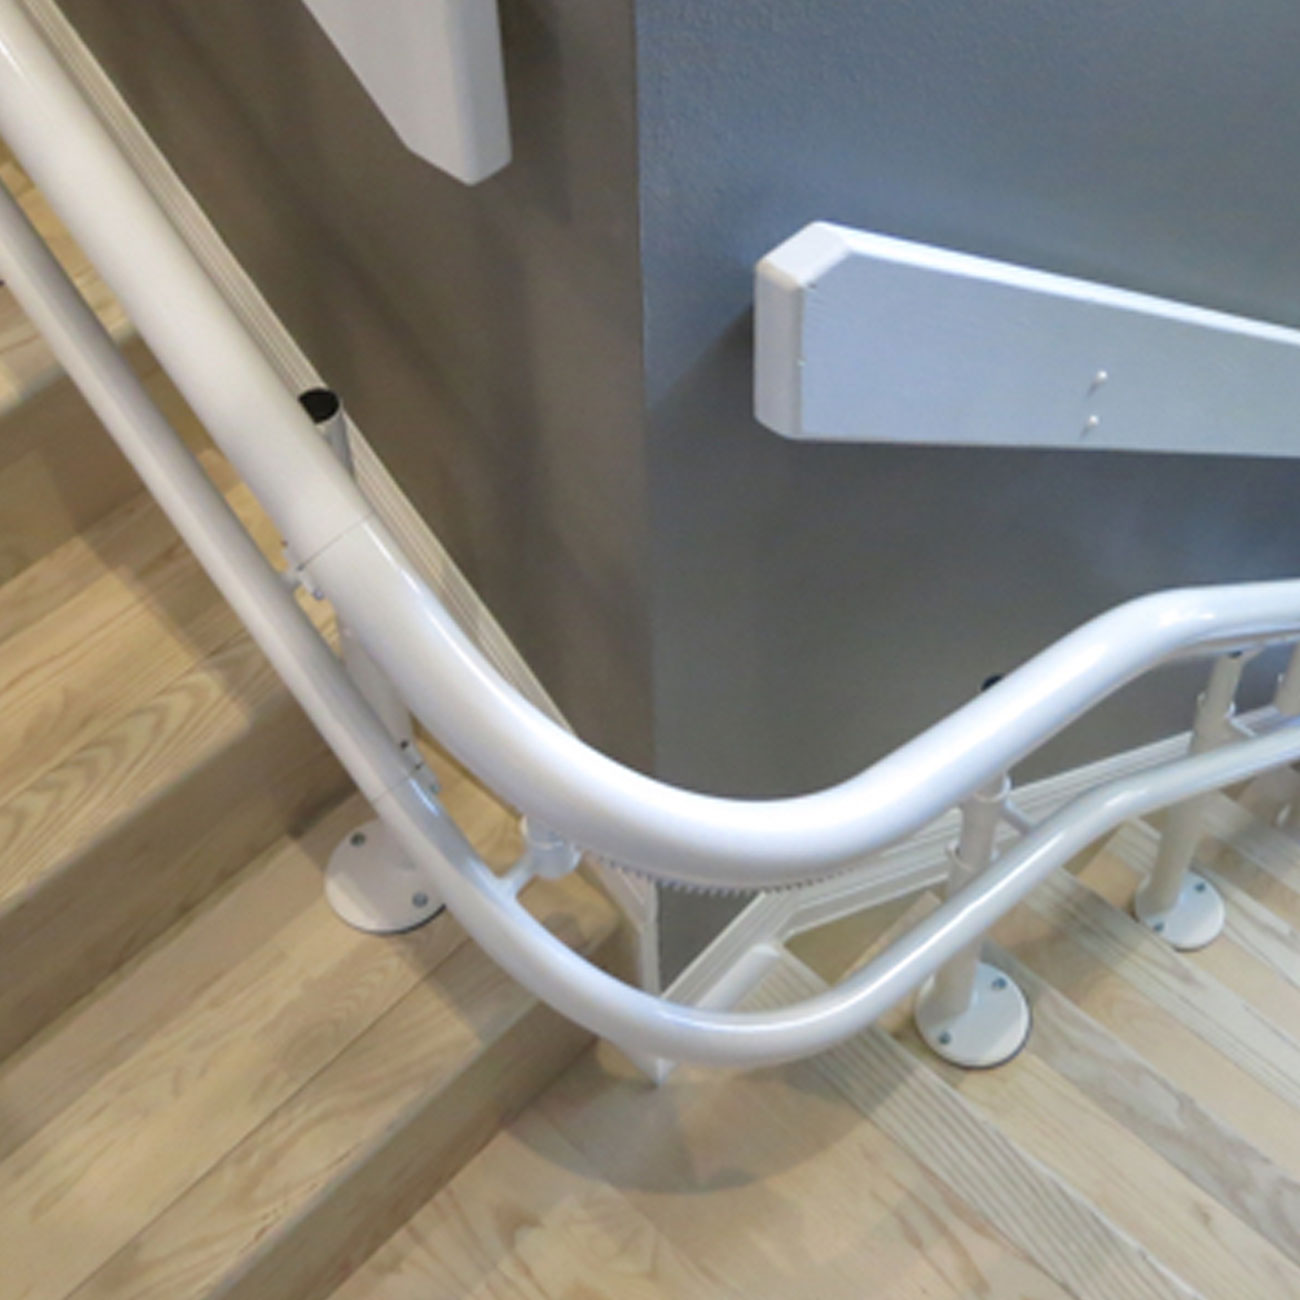 Image describing how stair-lift rails can be custom fabricated to fir your individual needs